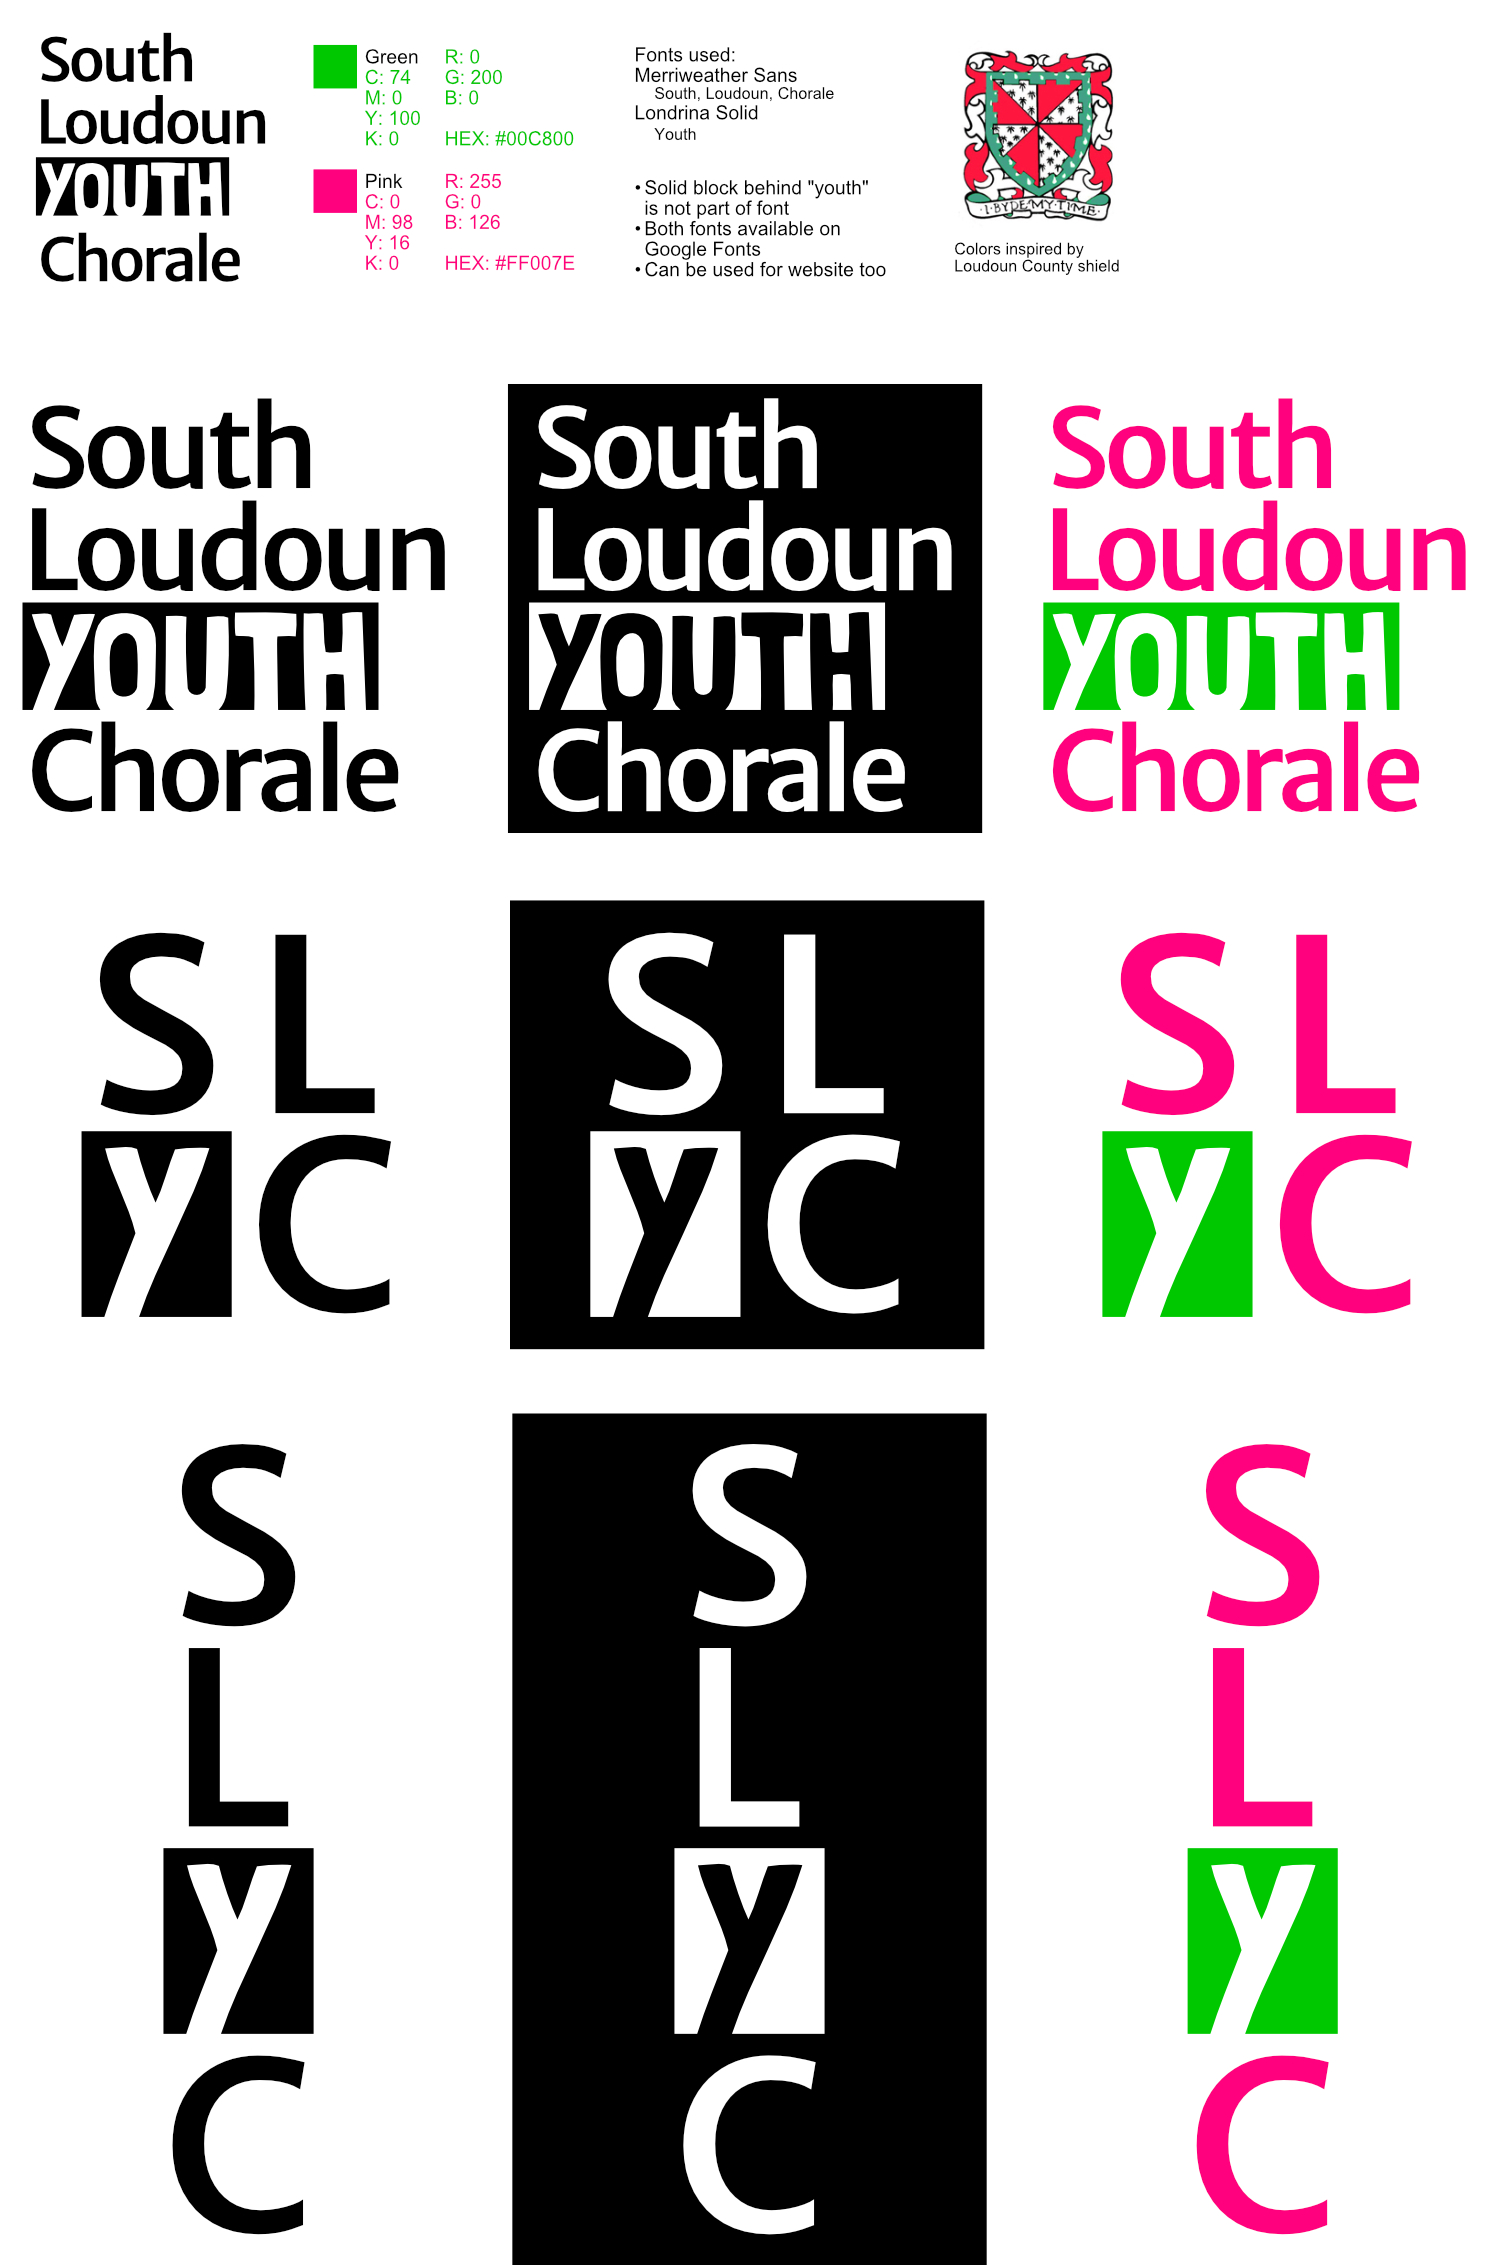 Collection of logos created for the South Loudoun Youth Chorale.